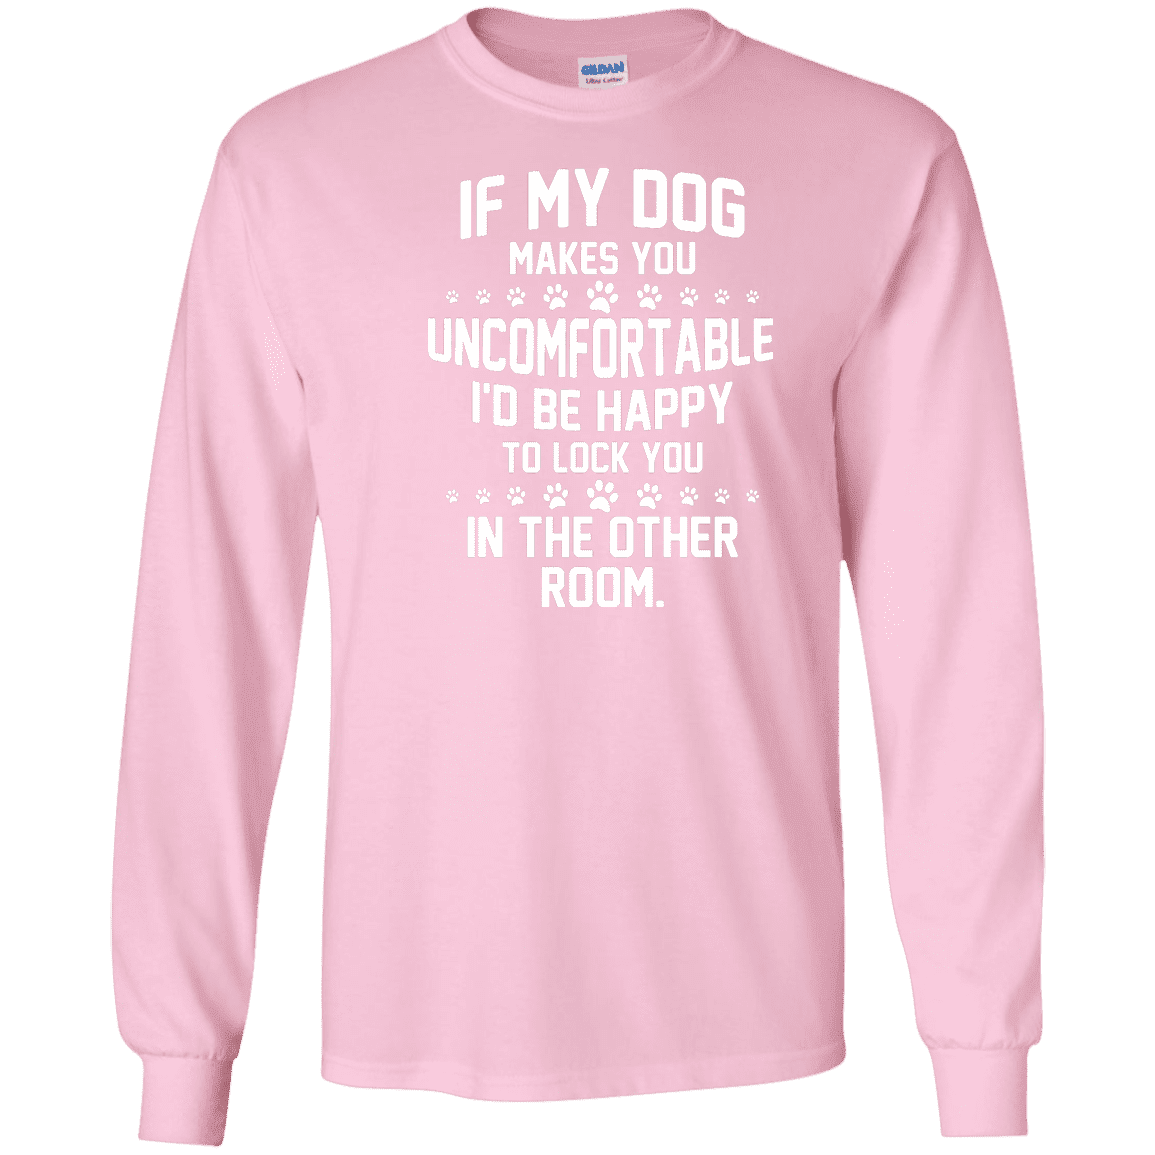 If My Dog Makes You Uncomfortable - Long Sleeve T Shirt.